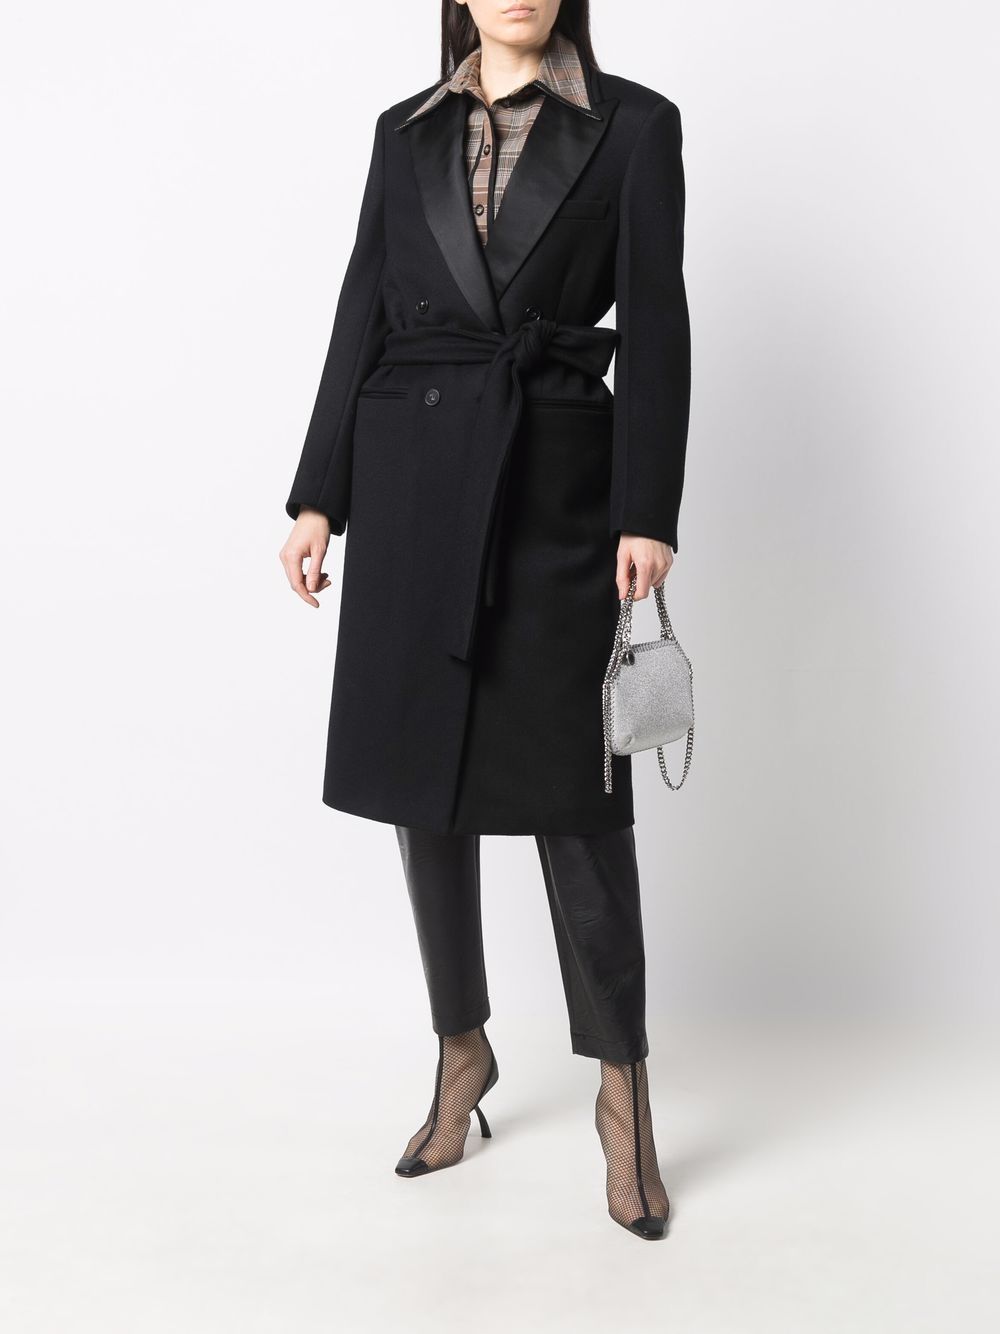 Stella McCartney double-breasted belted coat - WARDROB